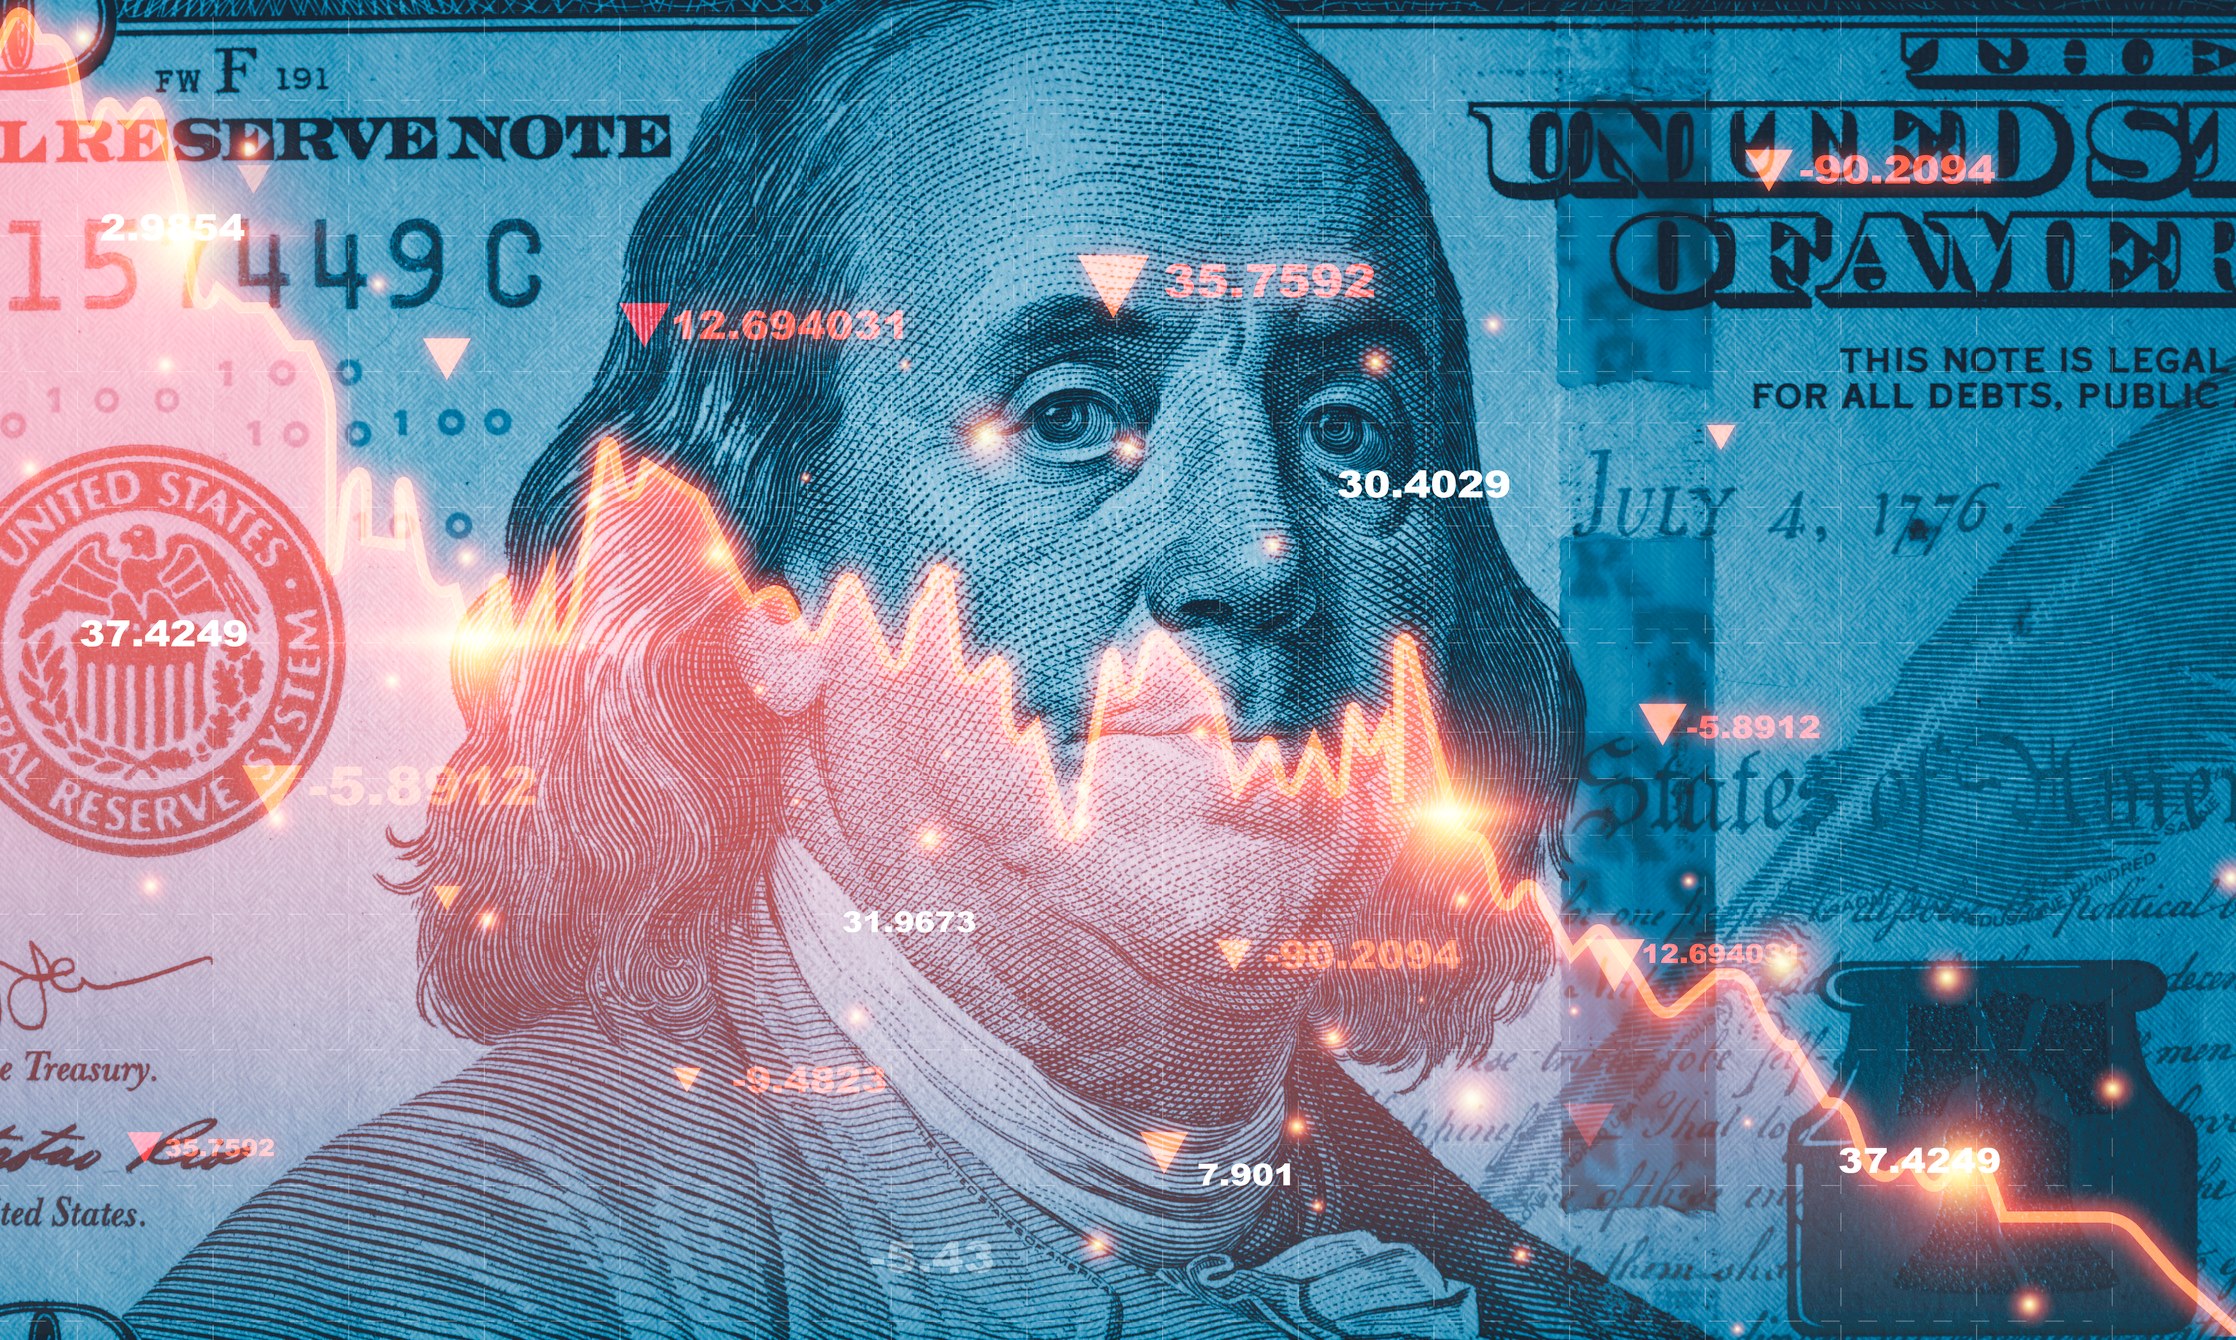 image of a 100 dollar bill with a graph overlaid